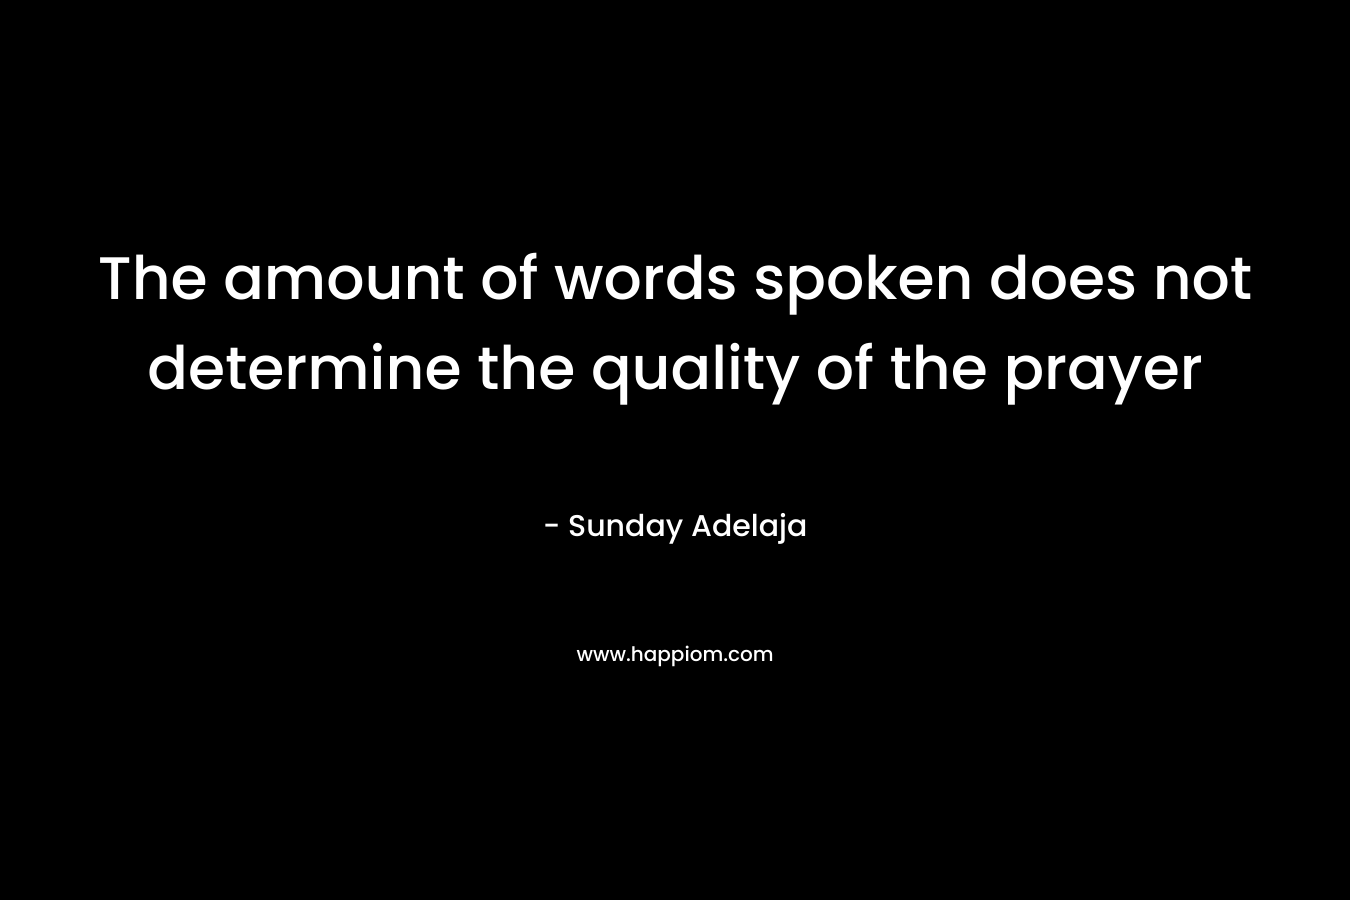 The amount of words spoken does not determine the quality of the prayer